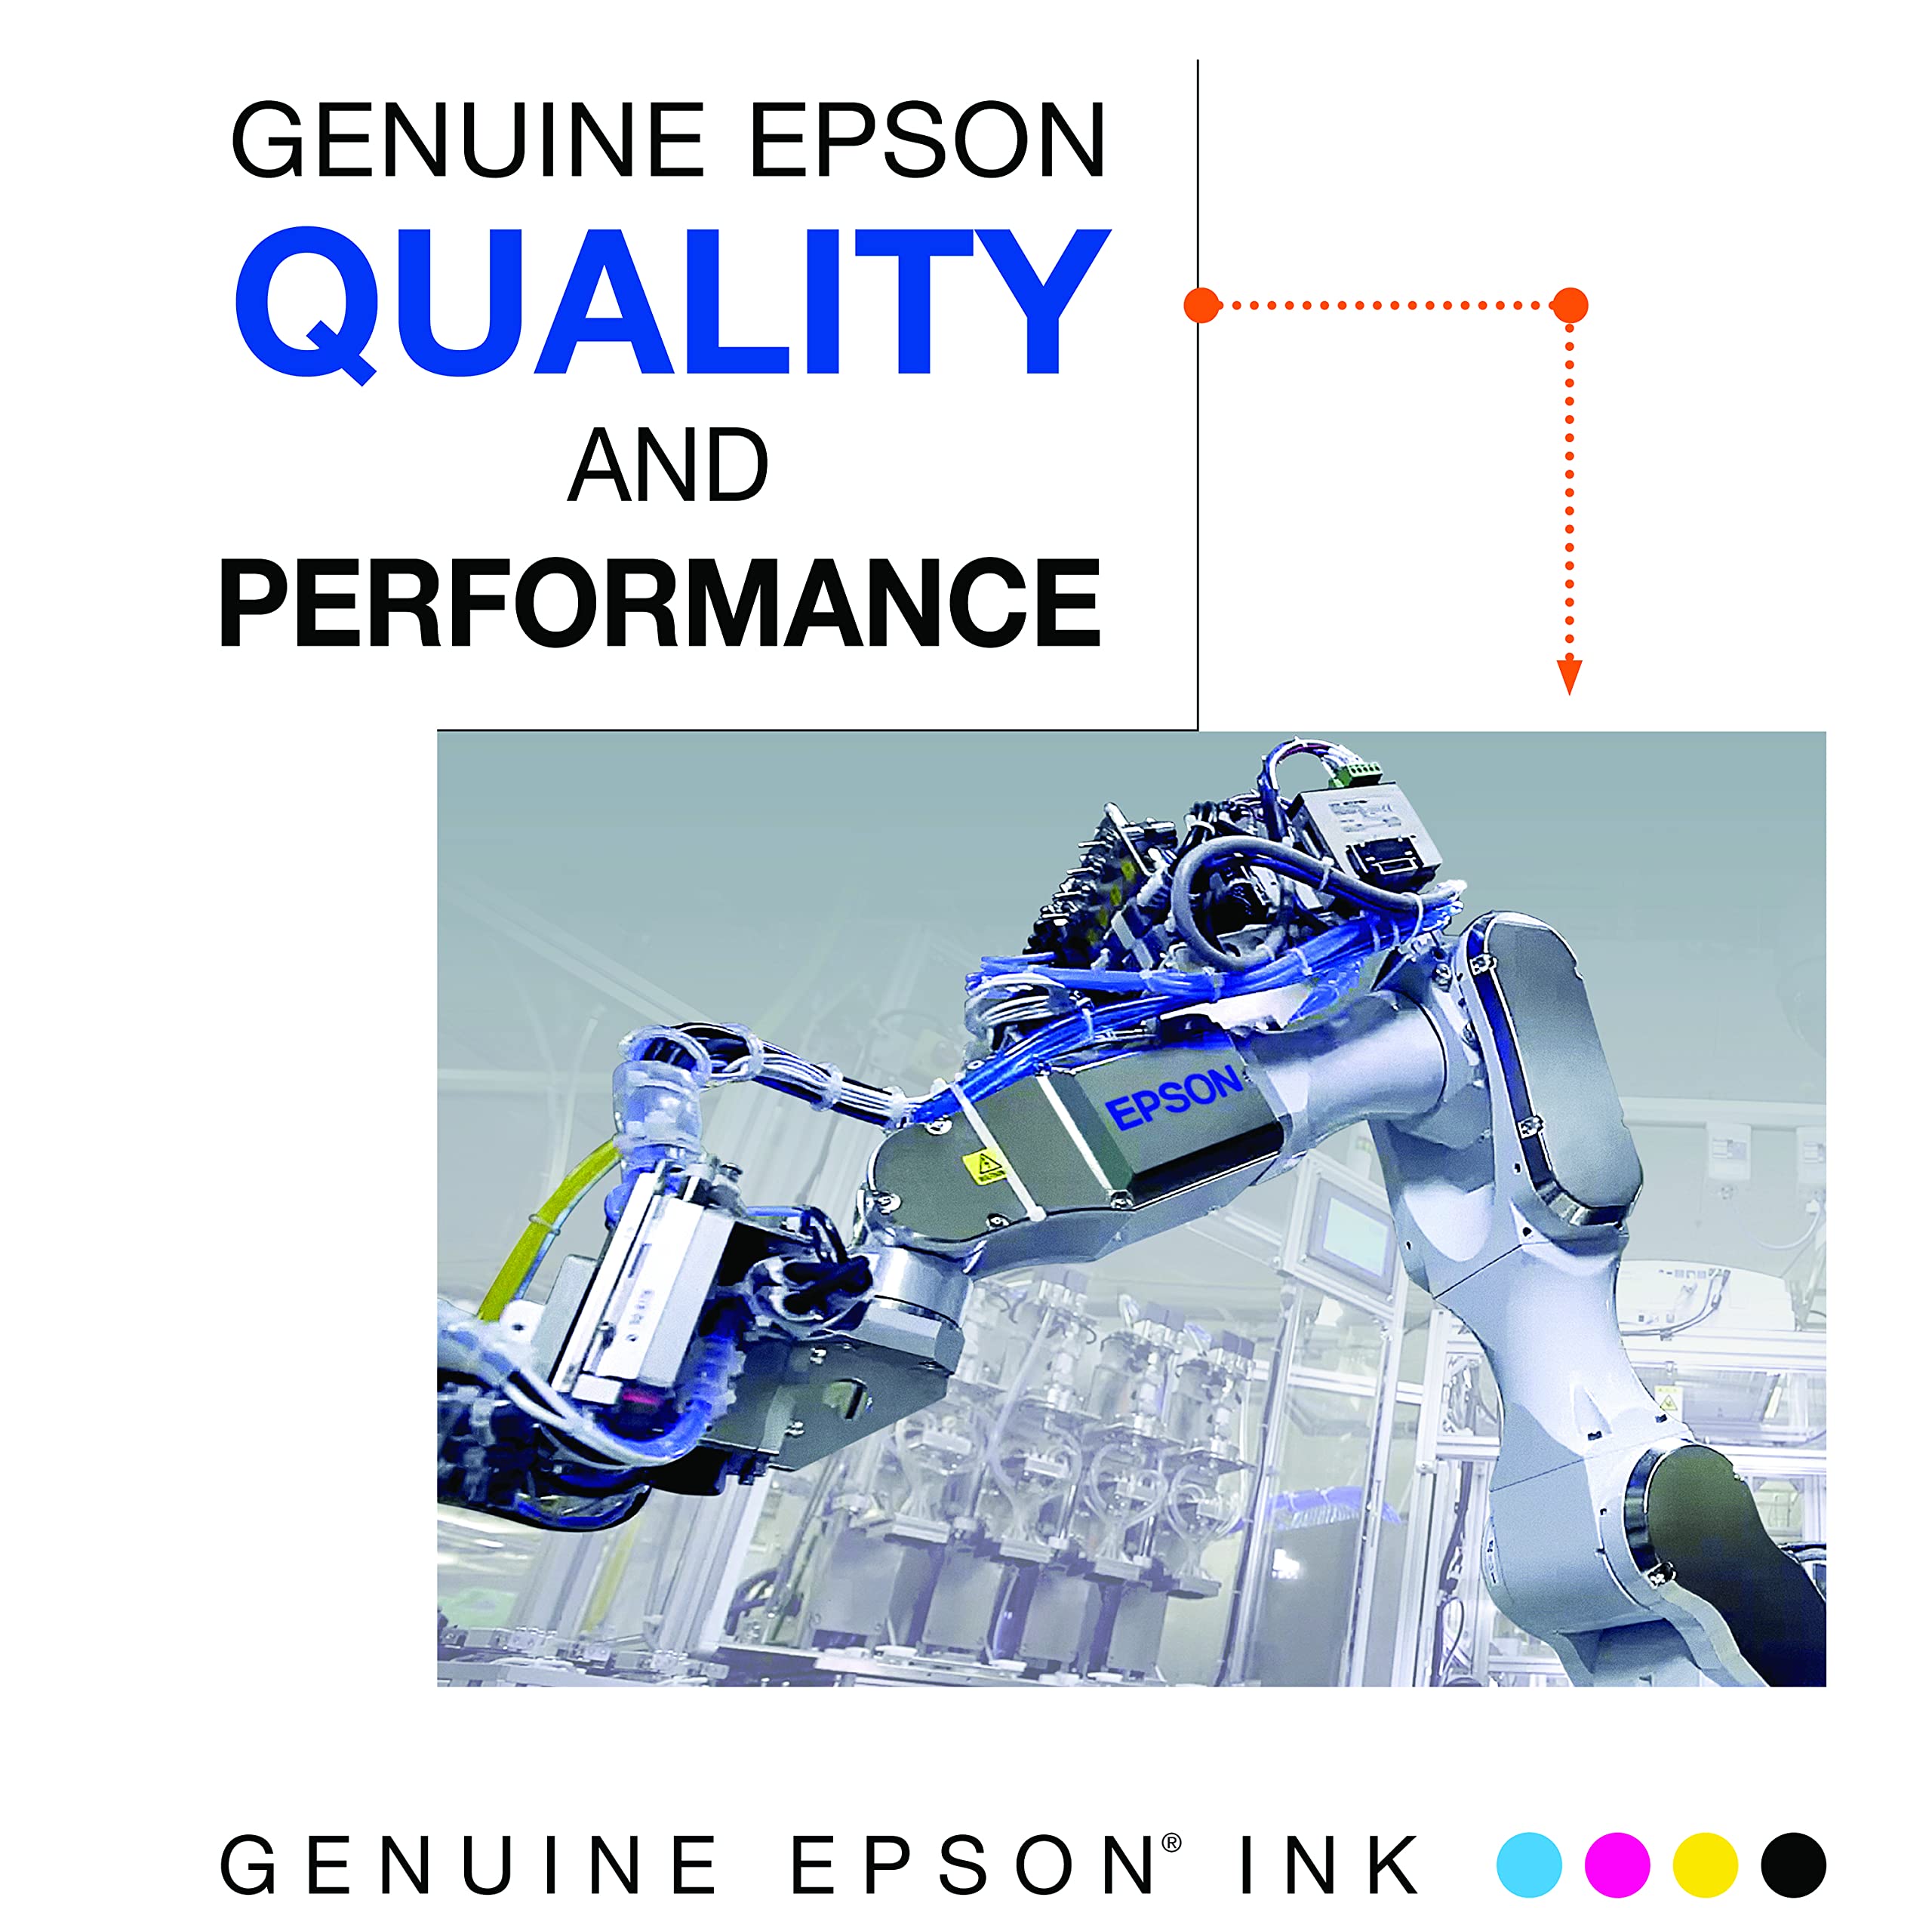 EPSON T822 DURABrite Ultra Ink High Capacity Black & Standard Color Cartridge Combo Pack (T822XL-BCS) for select Epson WorkForce Pro Printers